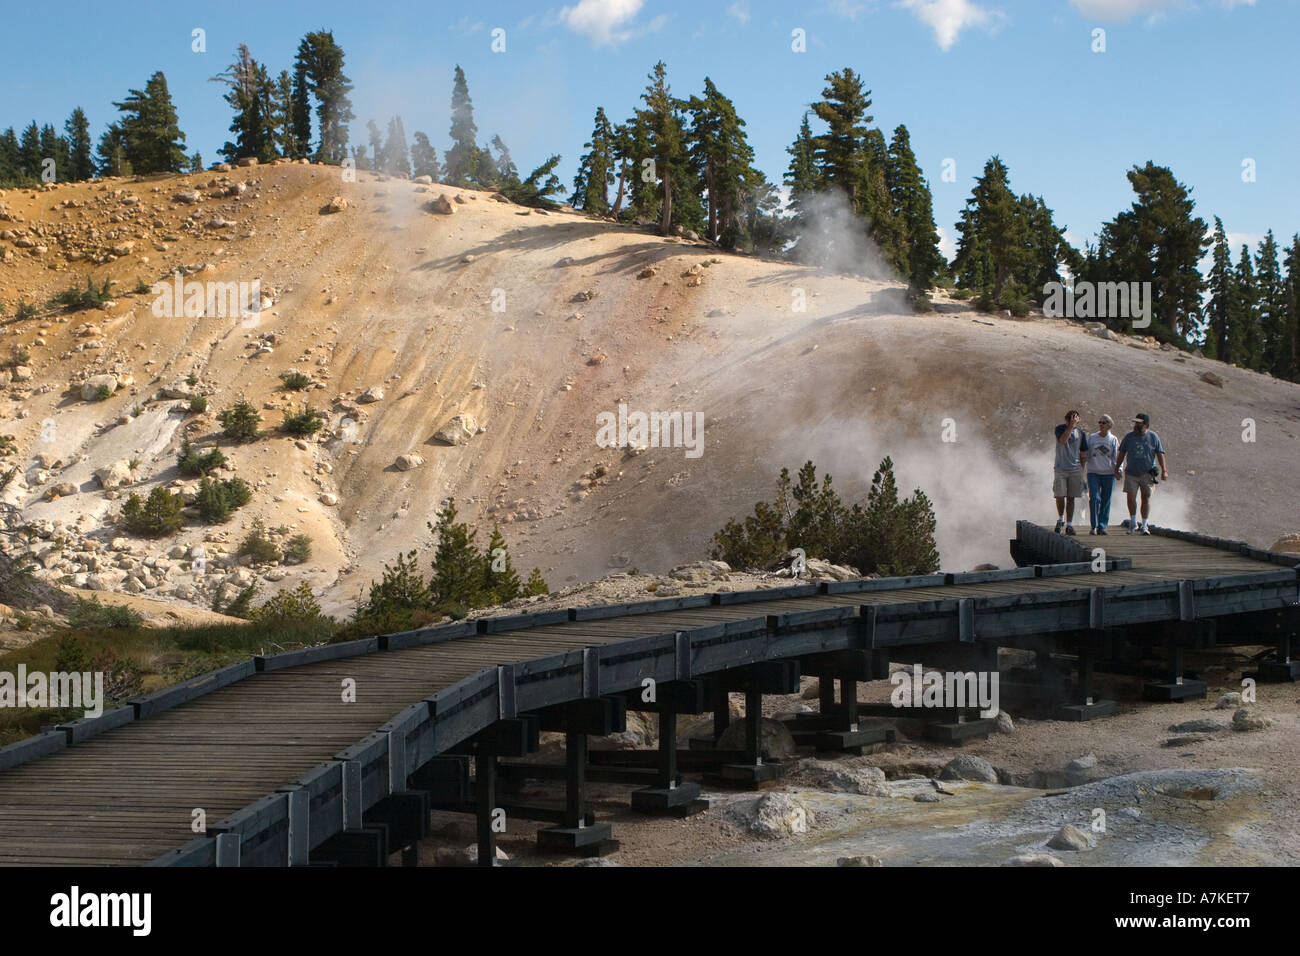 Steam engulfs visitors on a wooden pathway at the hot sulphur springs of BUMPASS HELL LASSEN NATIONAL PARK CALIFORNIA Stock Photo